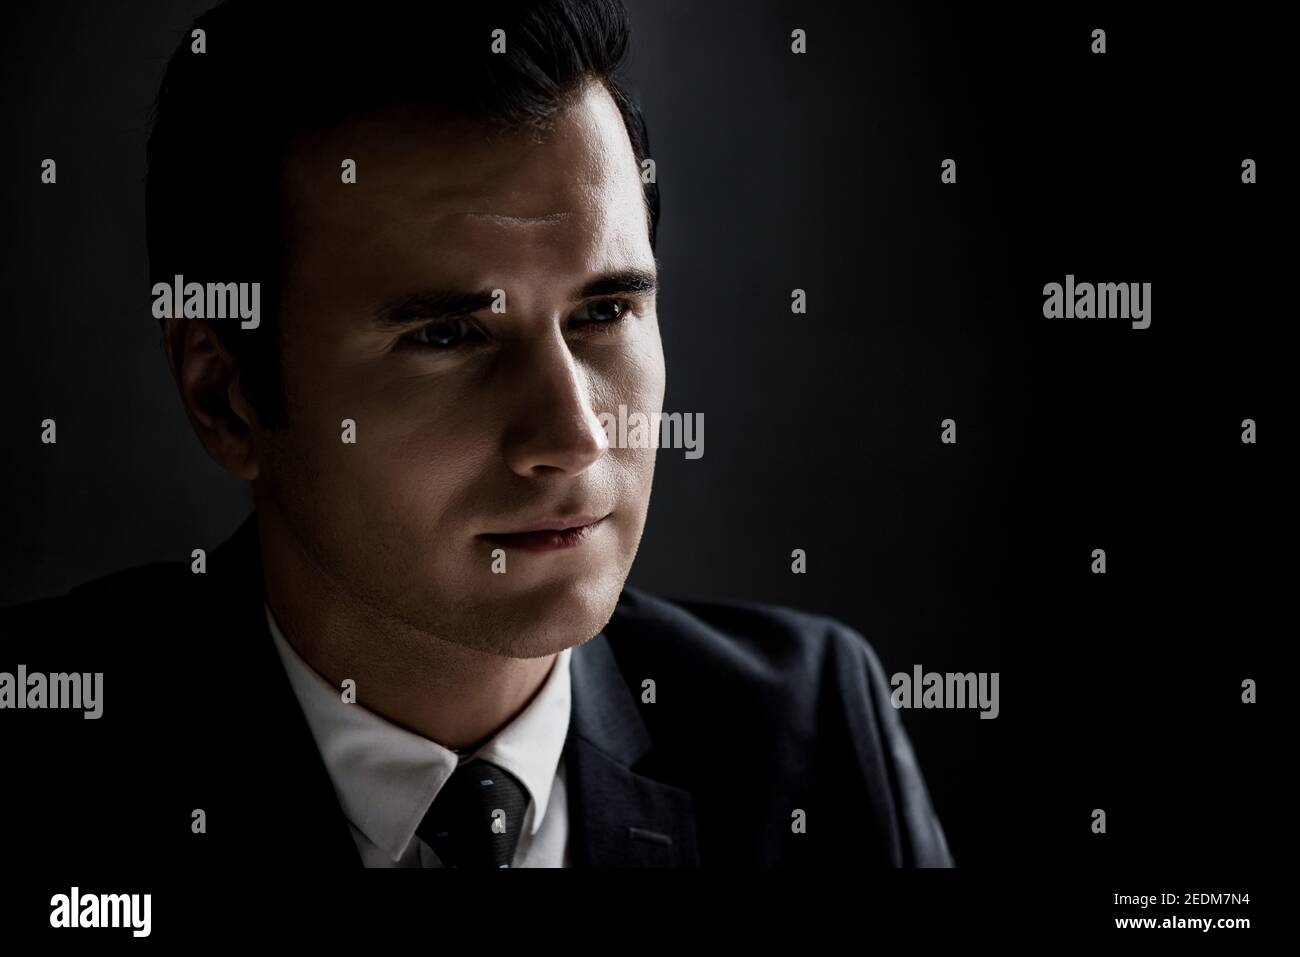 Man in shadow with serious face staring at interlocutor, criminal interrogation concept Stock Photo